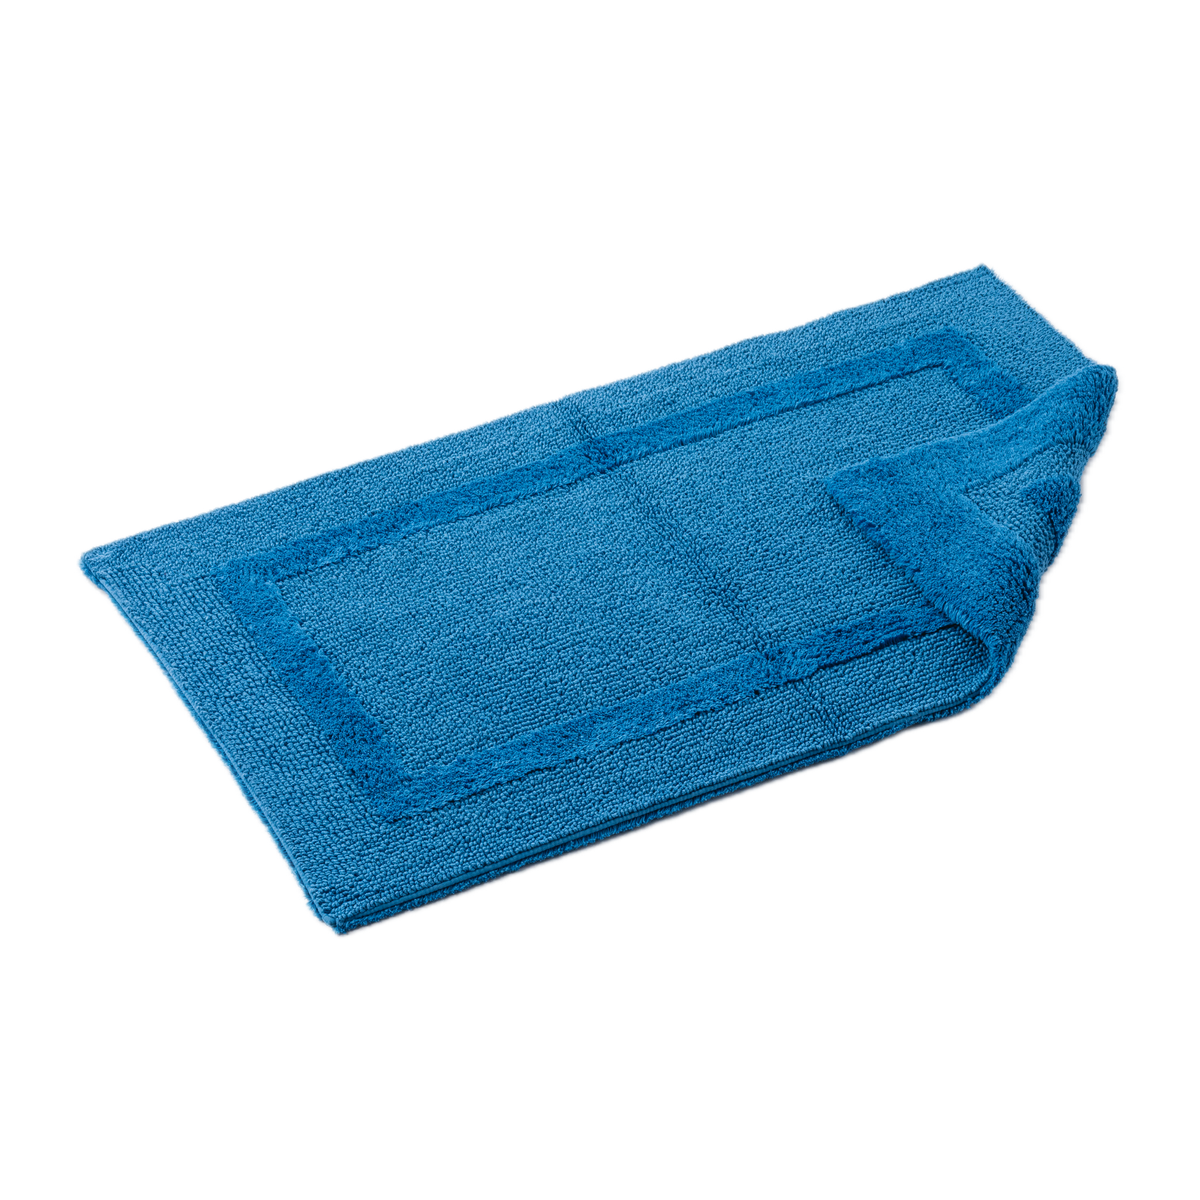 Tilted Image of Abyss Habidecor Reversible Bath Rug in Ocean Color